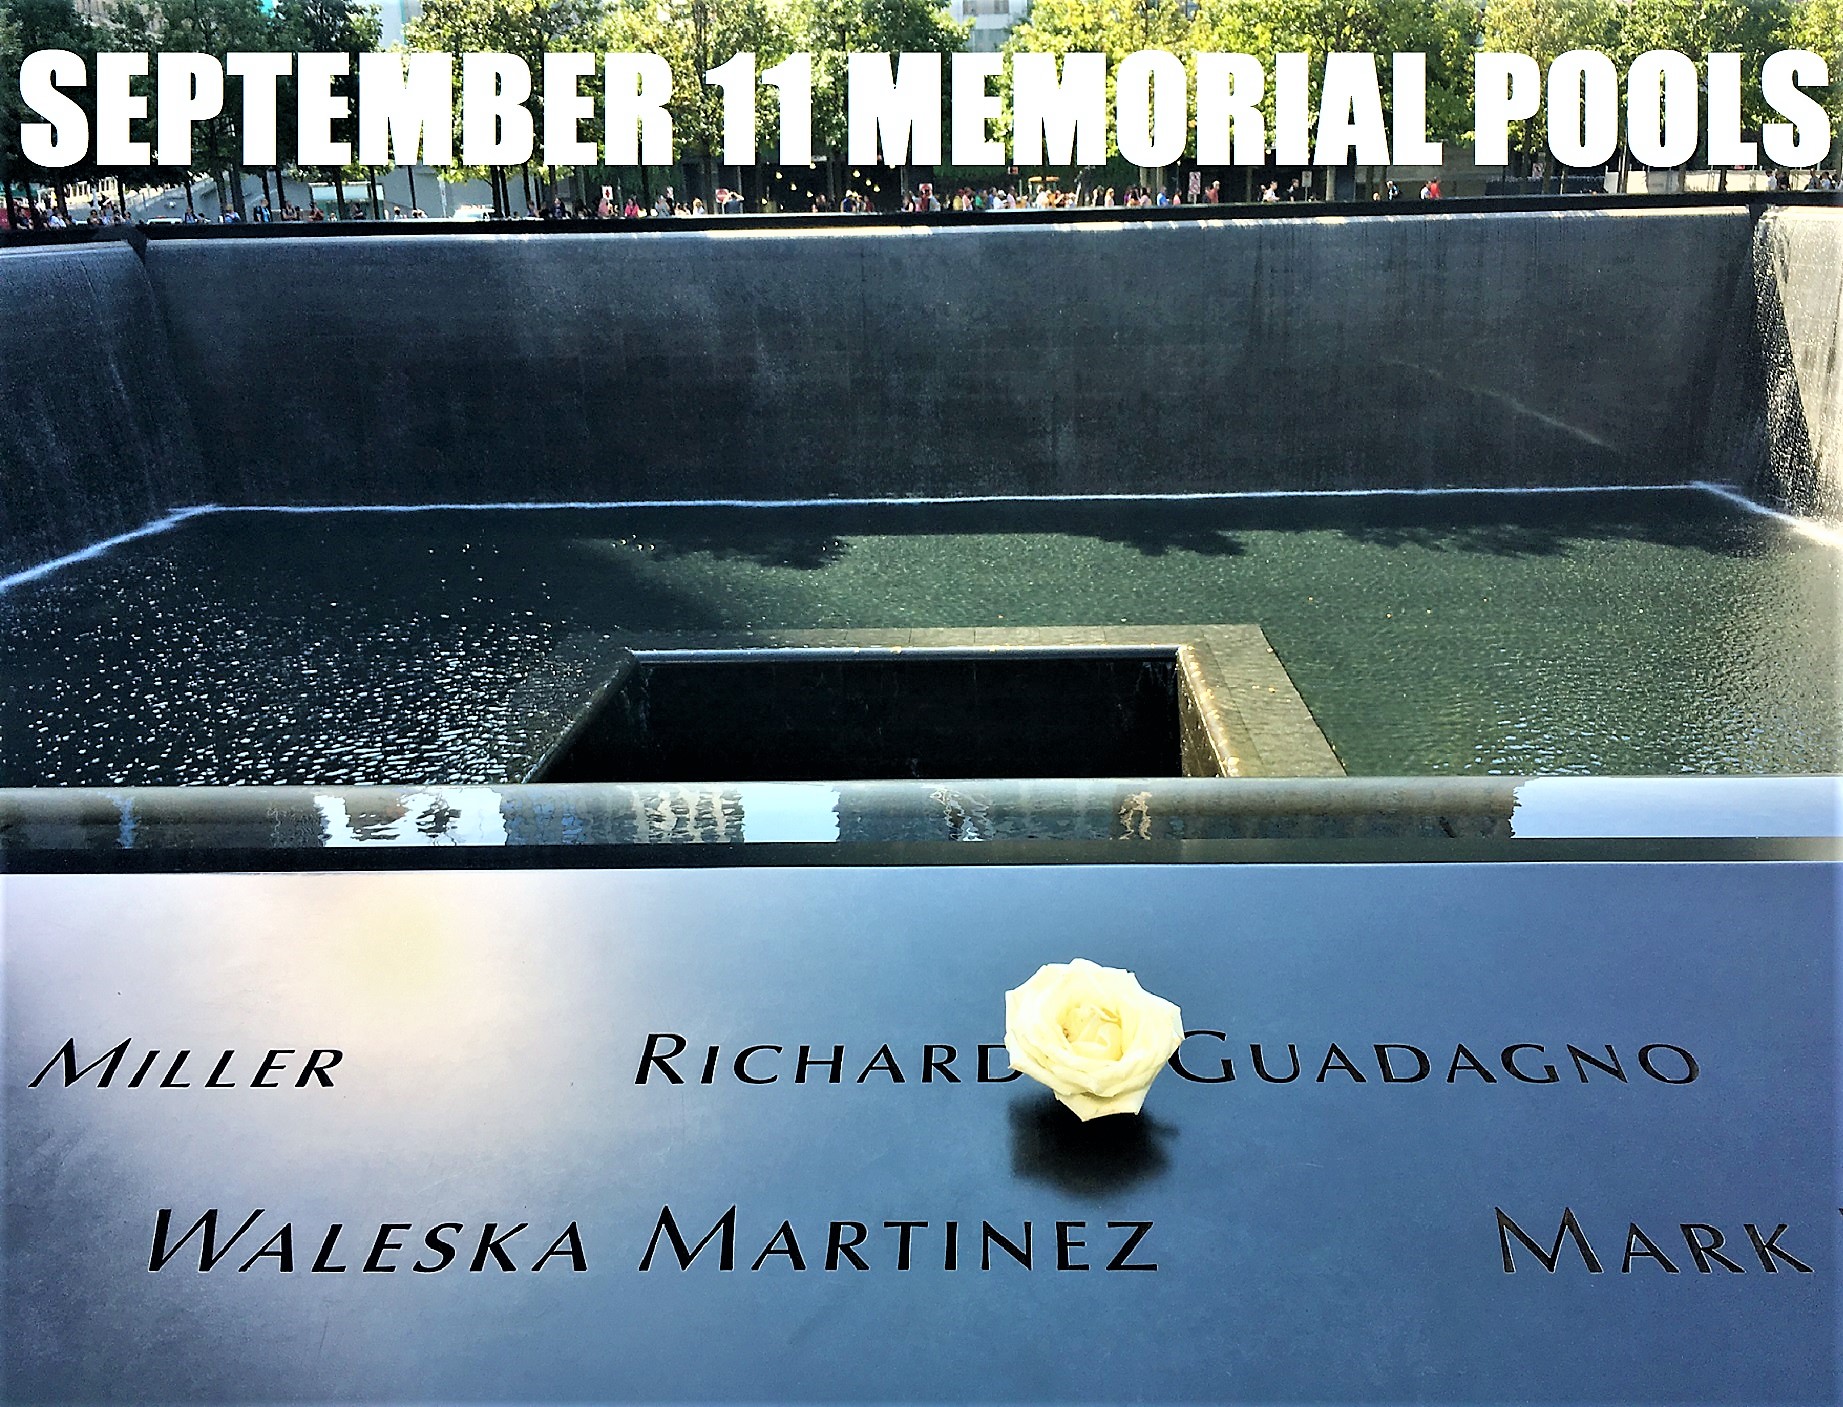 You are currently viewing Journey to the 9/11 Memorial Pools